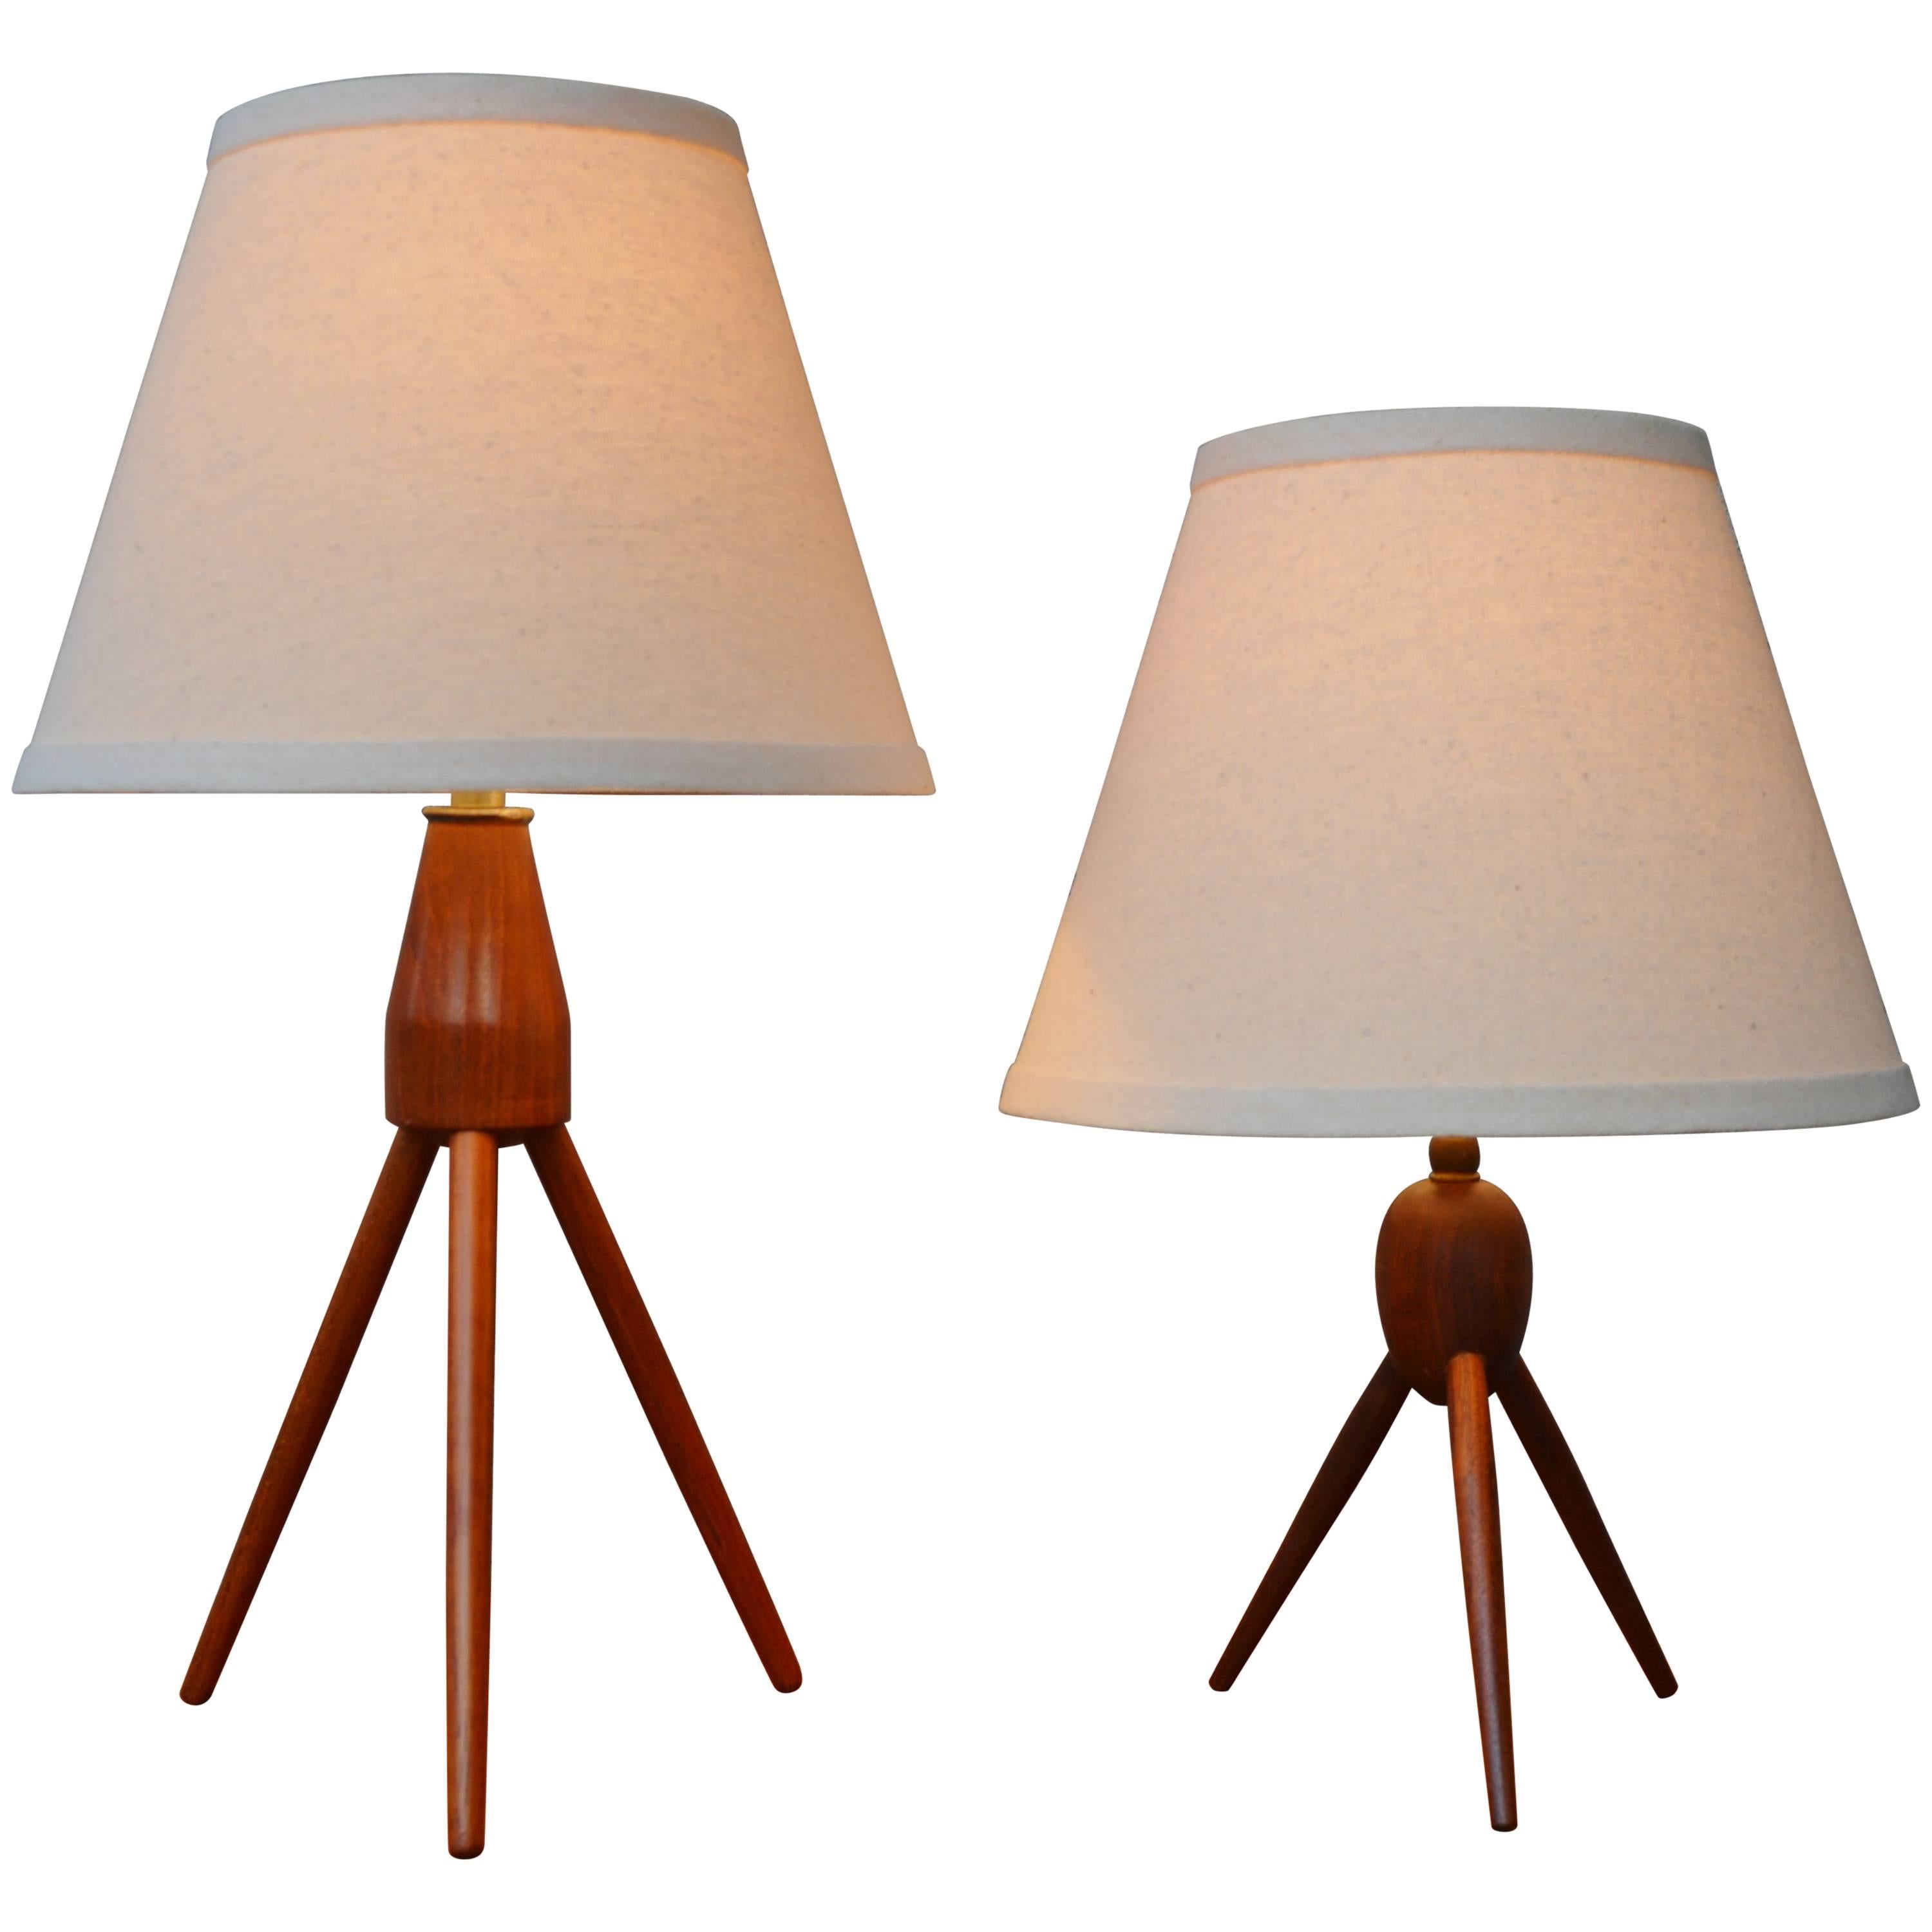 Two Danish Modern Teak Tripod Table Lamps New Conical Shades